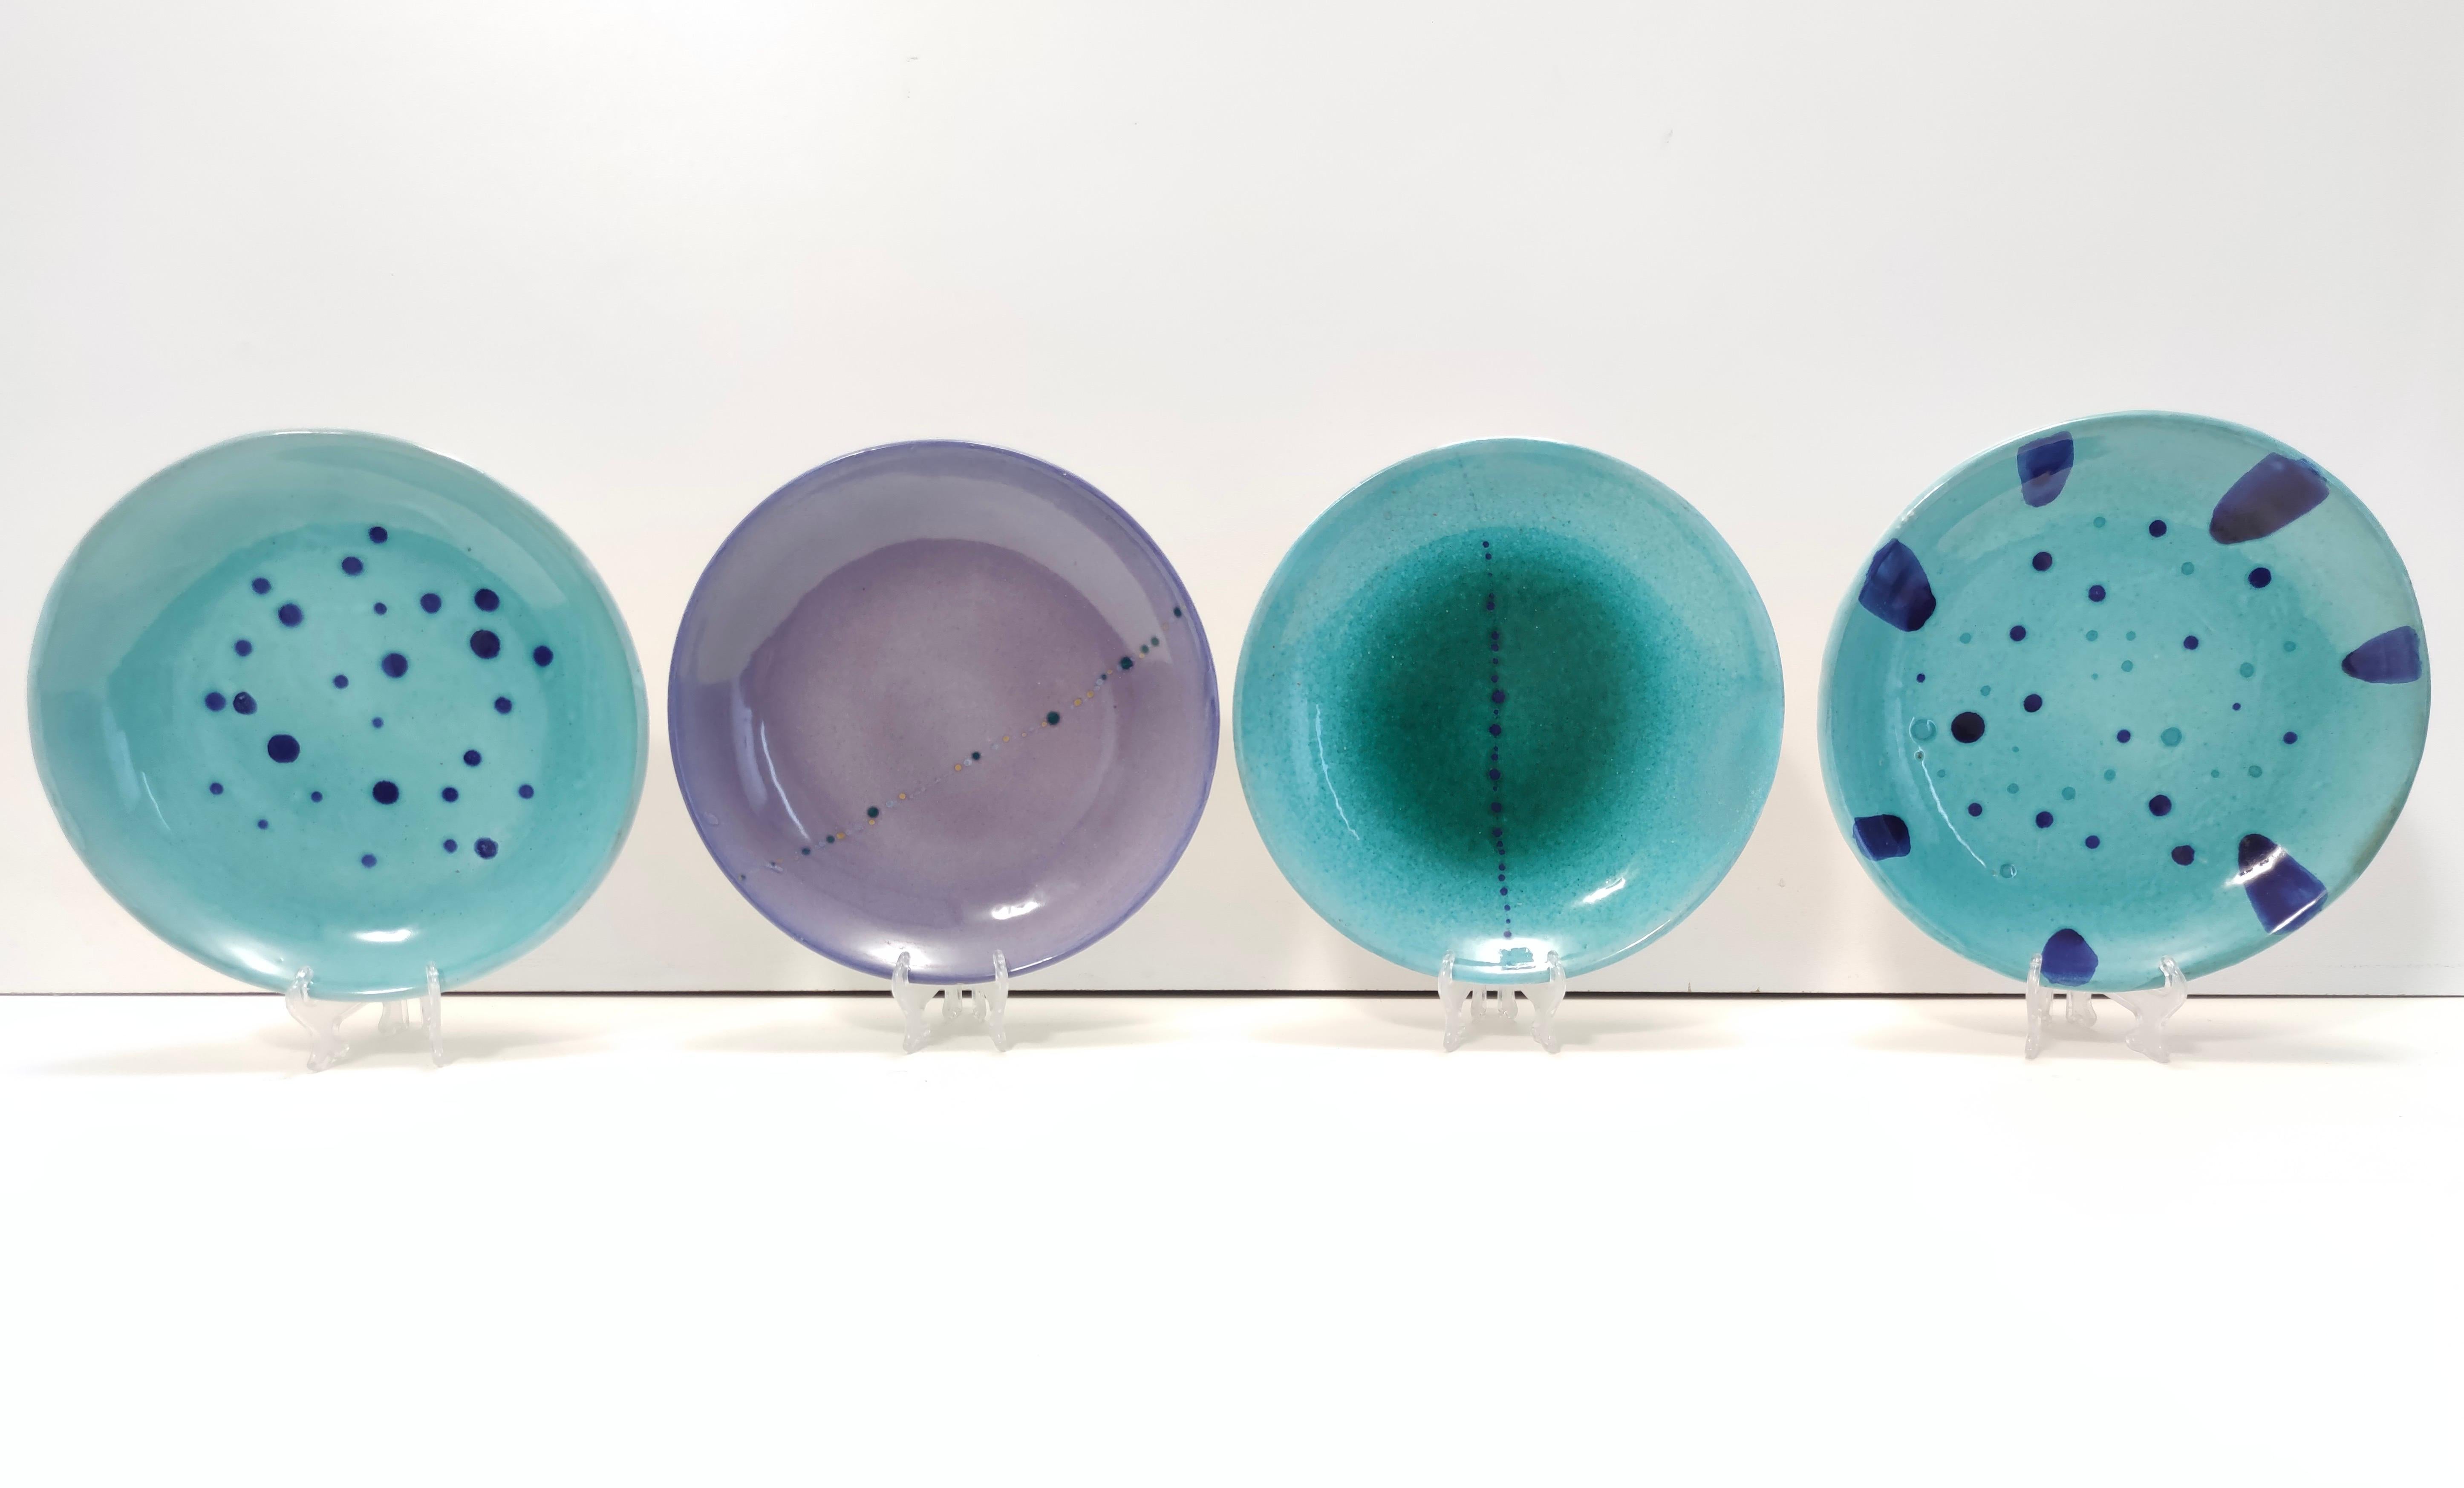 Made in Italy, 1950s - 1960s.  
This set of four catchalls / vide-poches / decorative plates is made in glazed earthenware.
These space-inspired plates are hand-made and hand-painted in the furnace of 